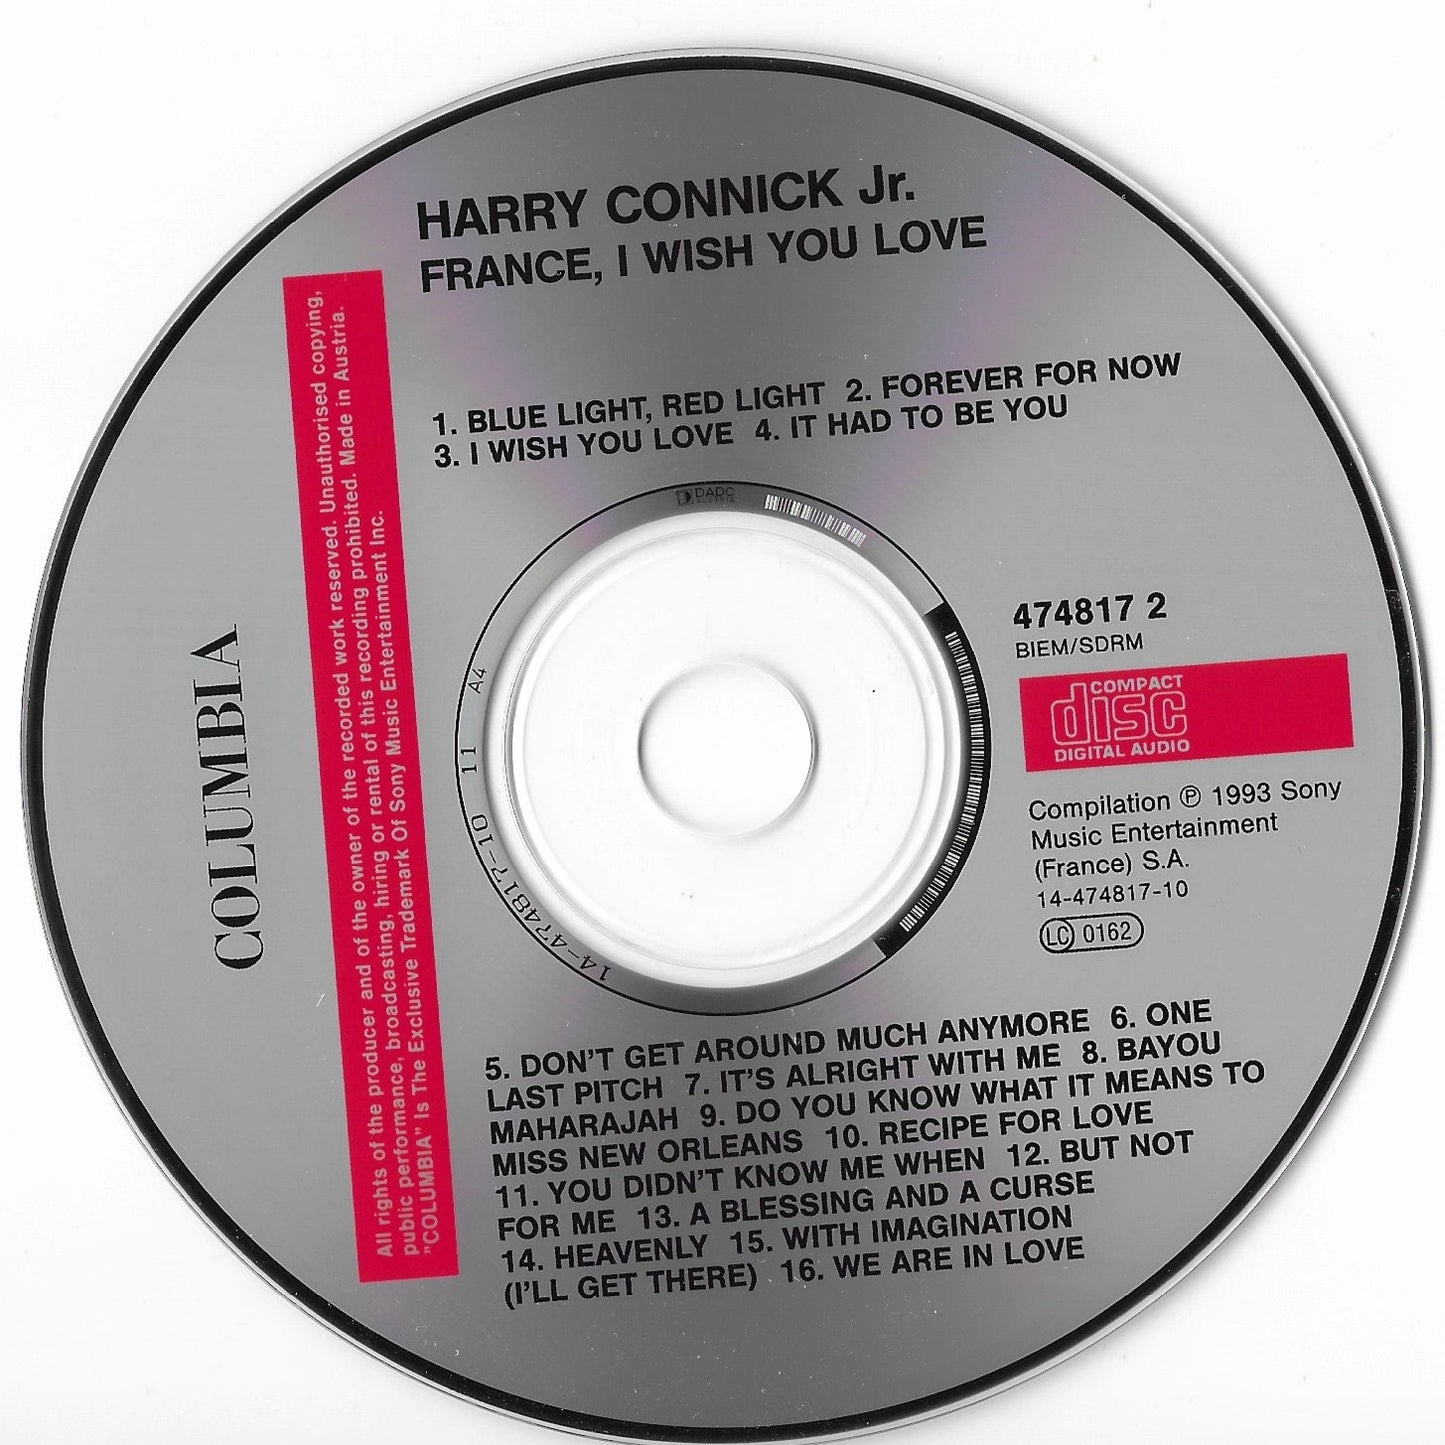 HARRY CONNICK JR - France, I Wish You Love